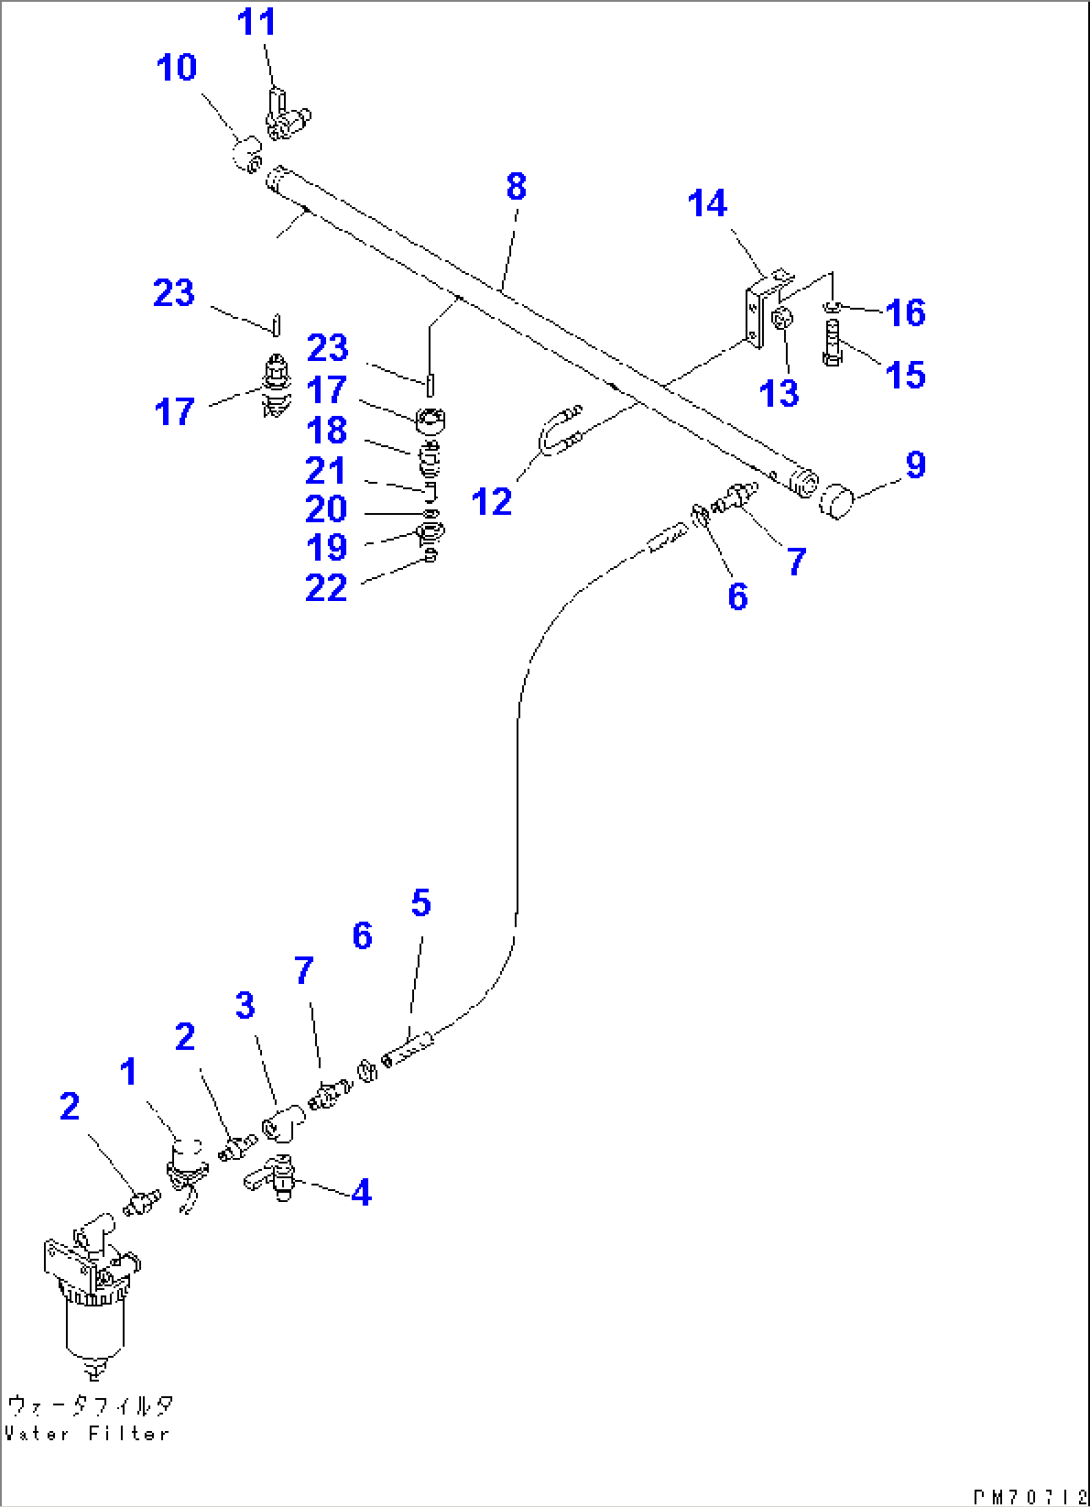 WATER PIPING (3/3) (REAR NOZZLE LINE)(#1232-)